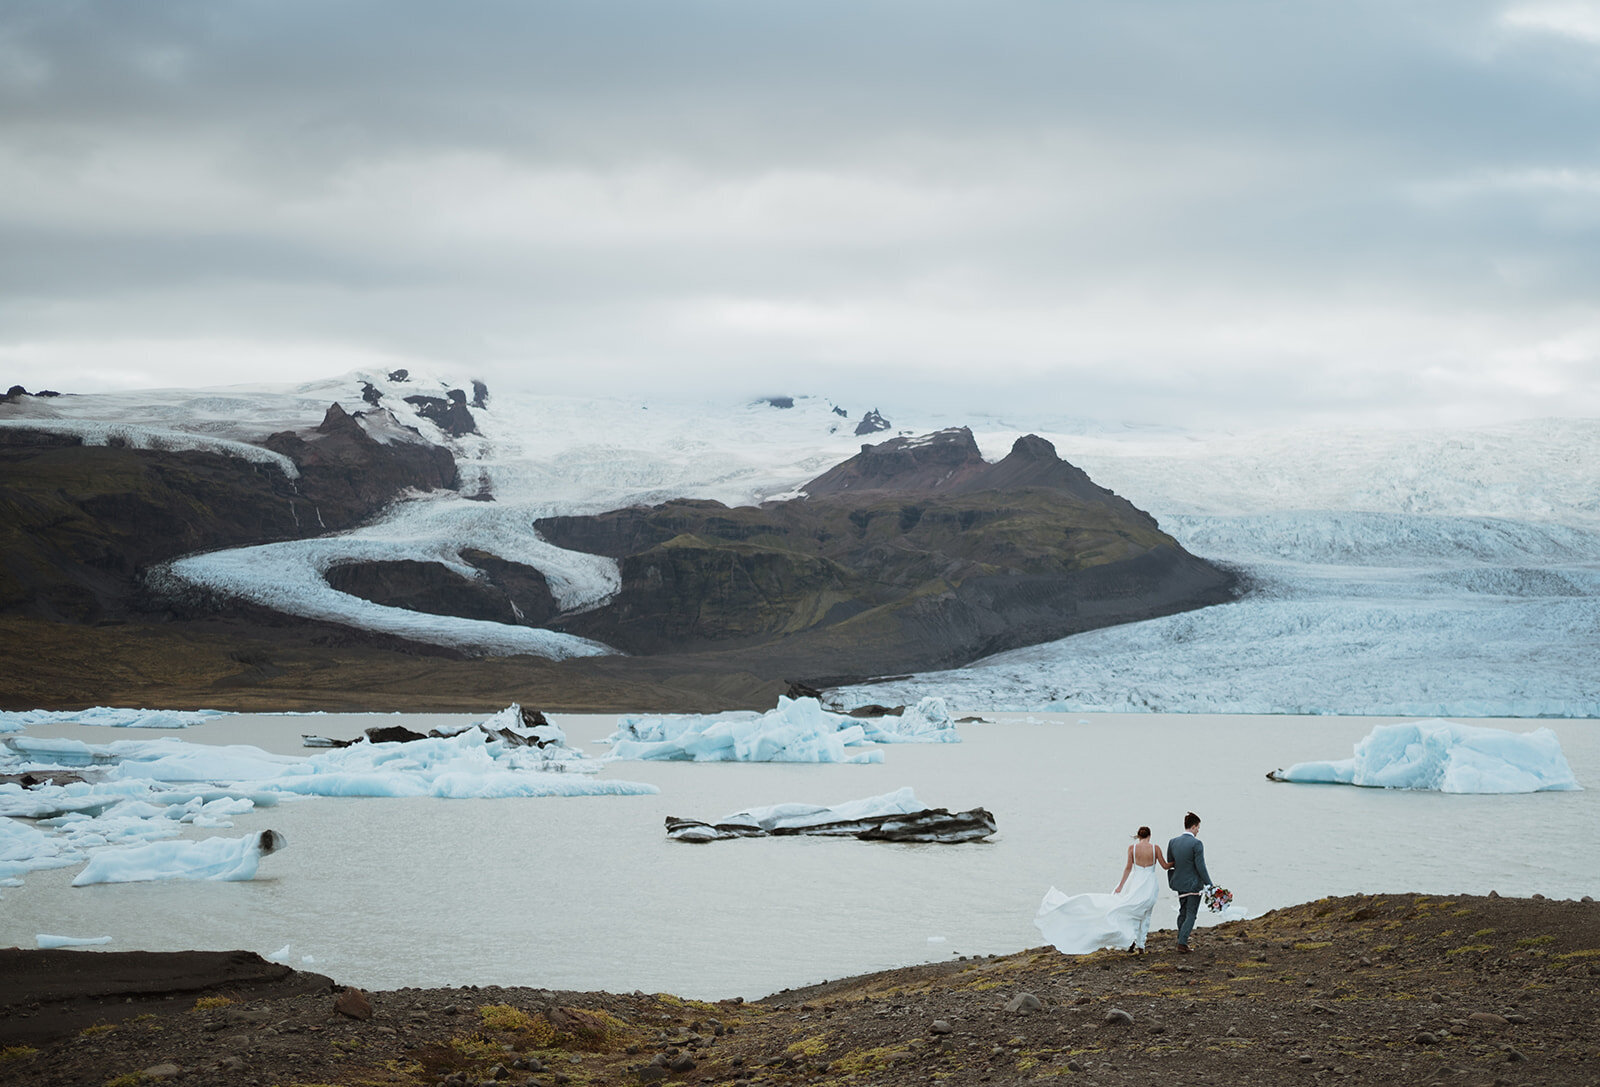 the bride and groom are walking along a ridge that leads to a basin filled with glaciers and mountains. they are far away and the bride's dress is blowing in the wind. the groom is holding her flowers as they walk side by side.